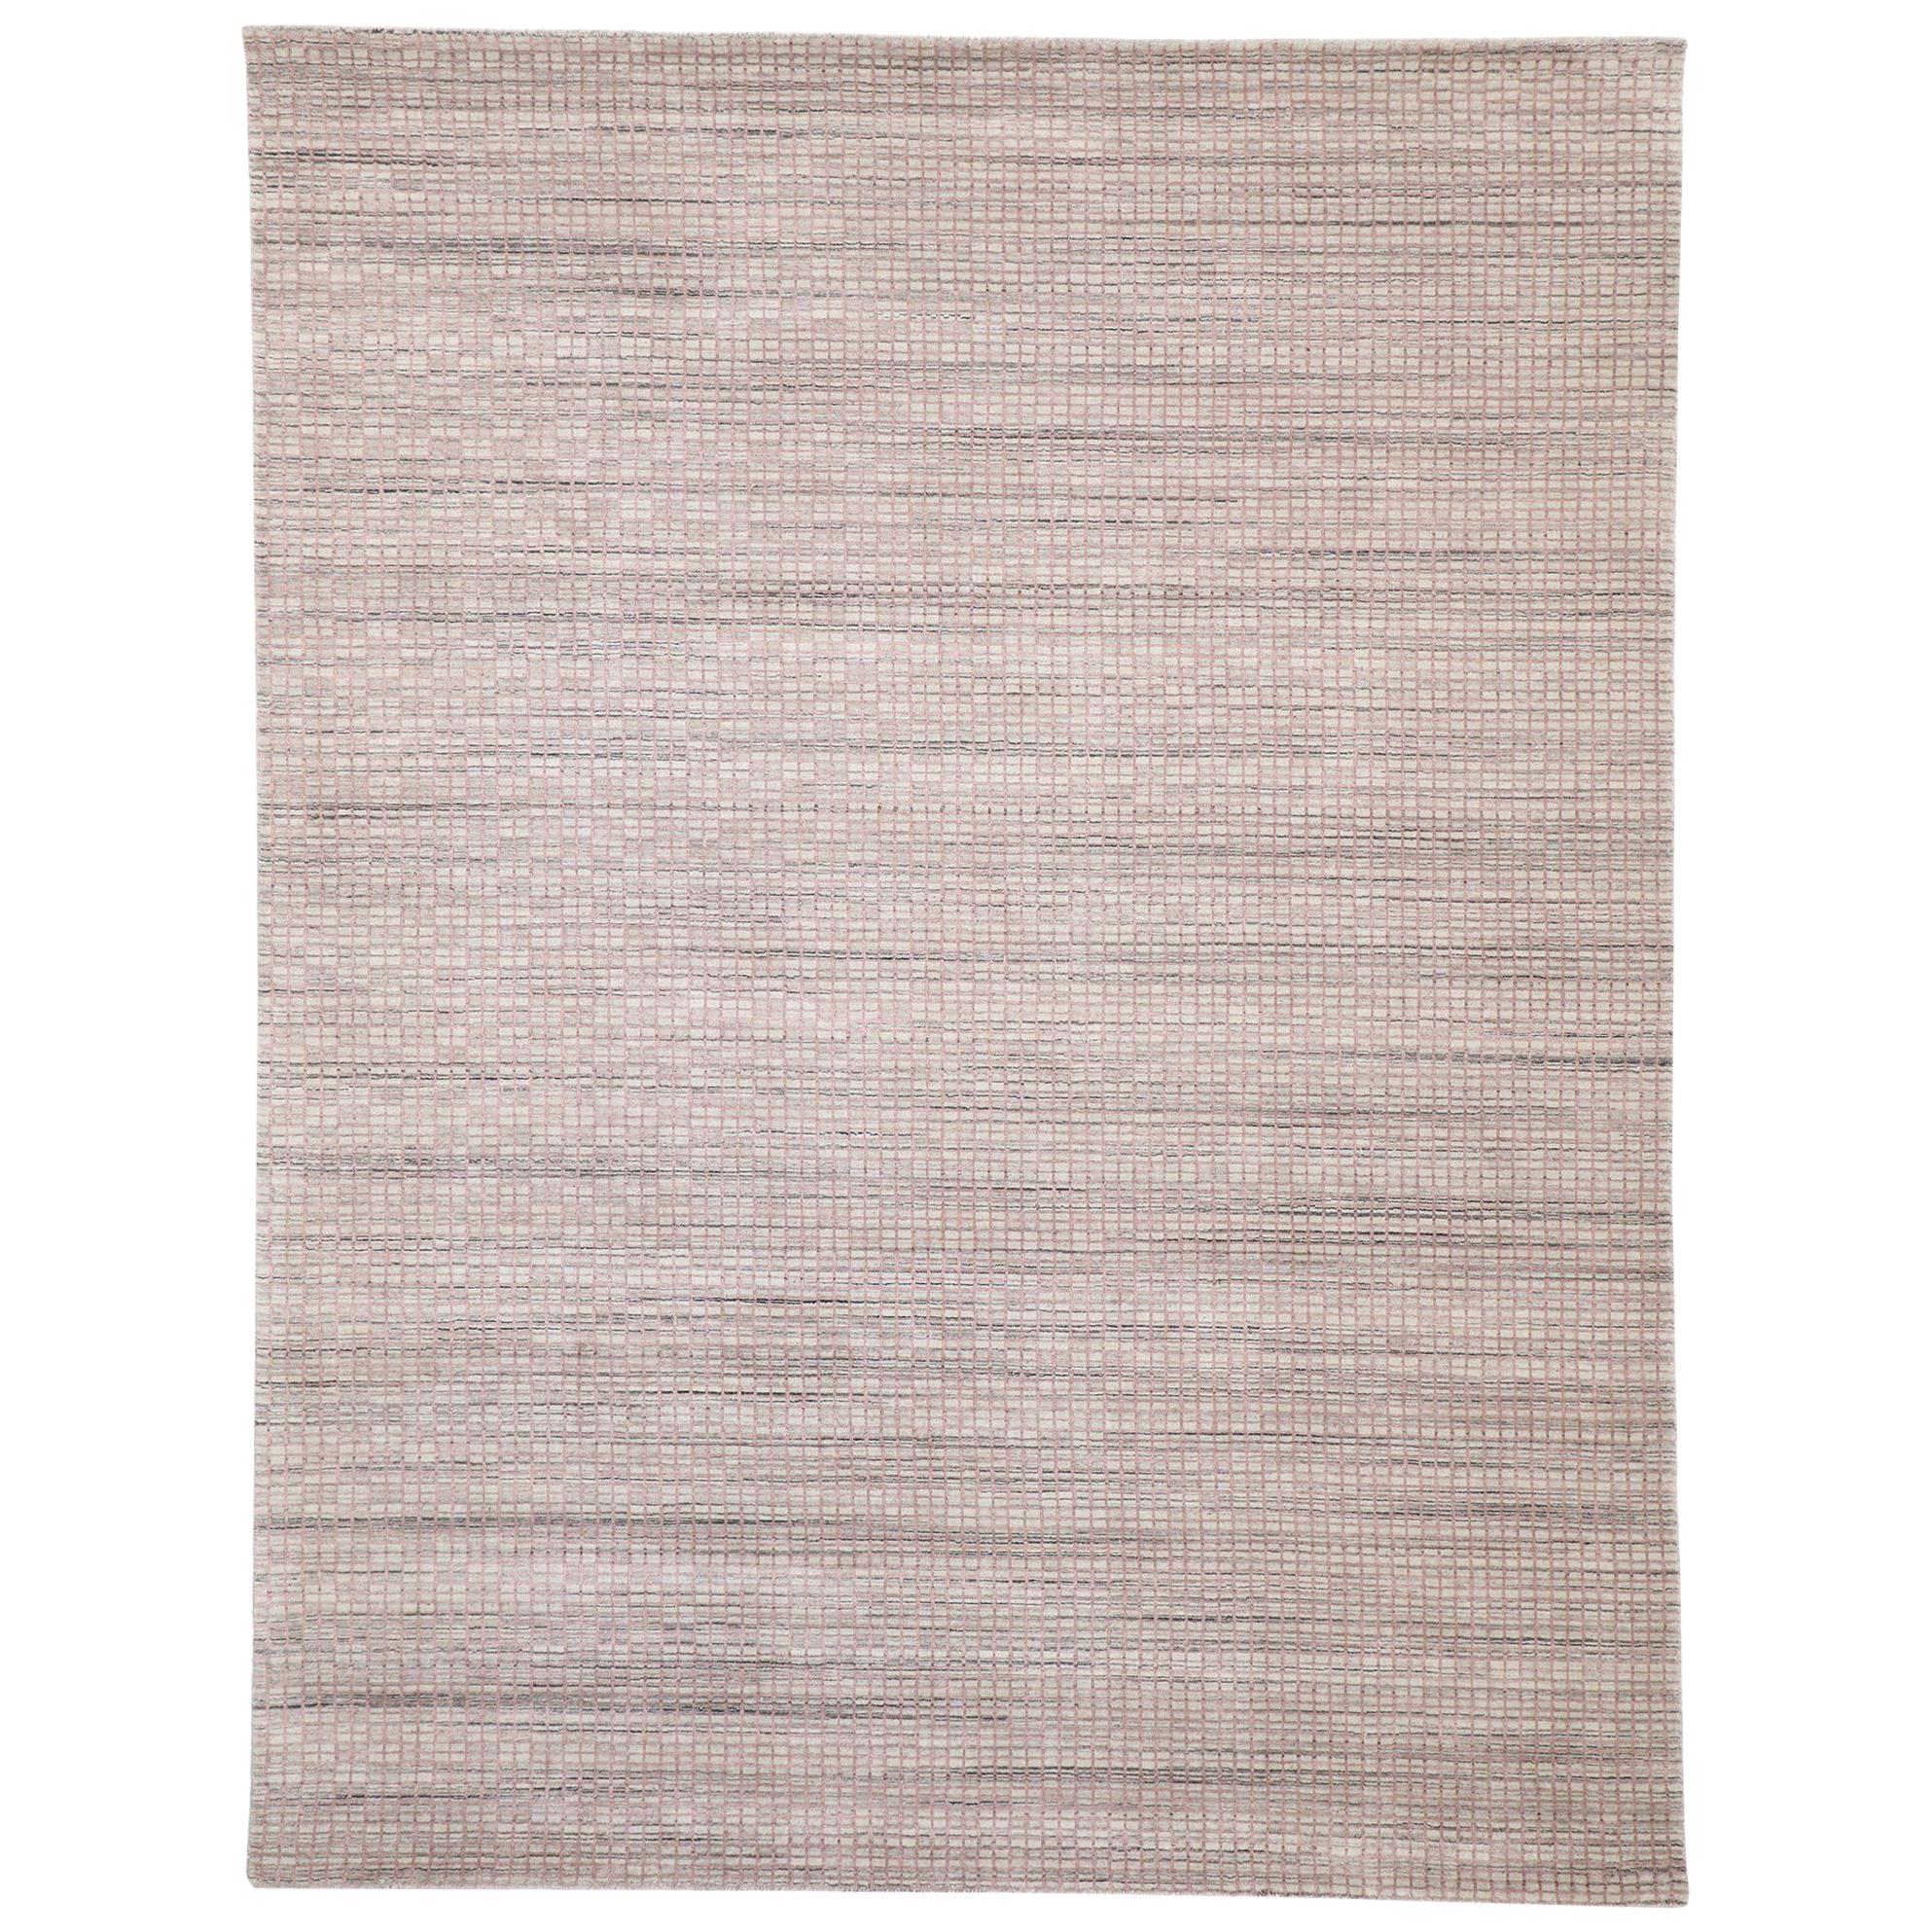 New Transitional Area Rug with Scandinavian Modern Swedish Shabby Chic Style